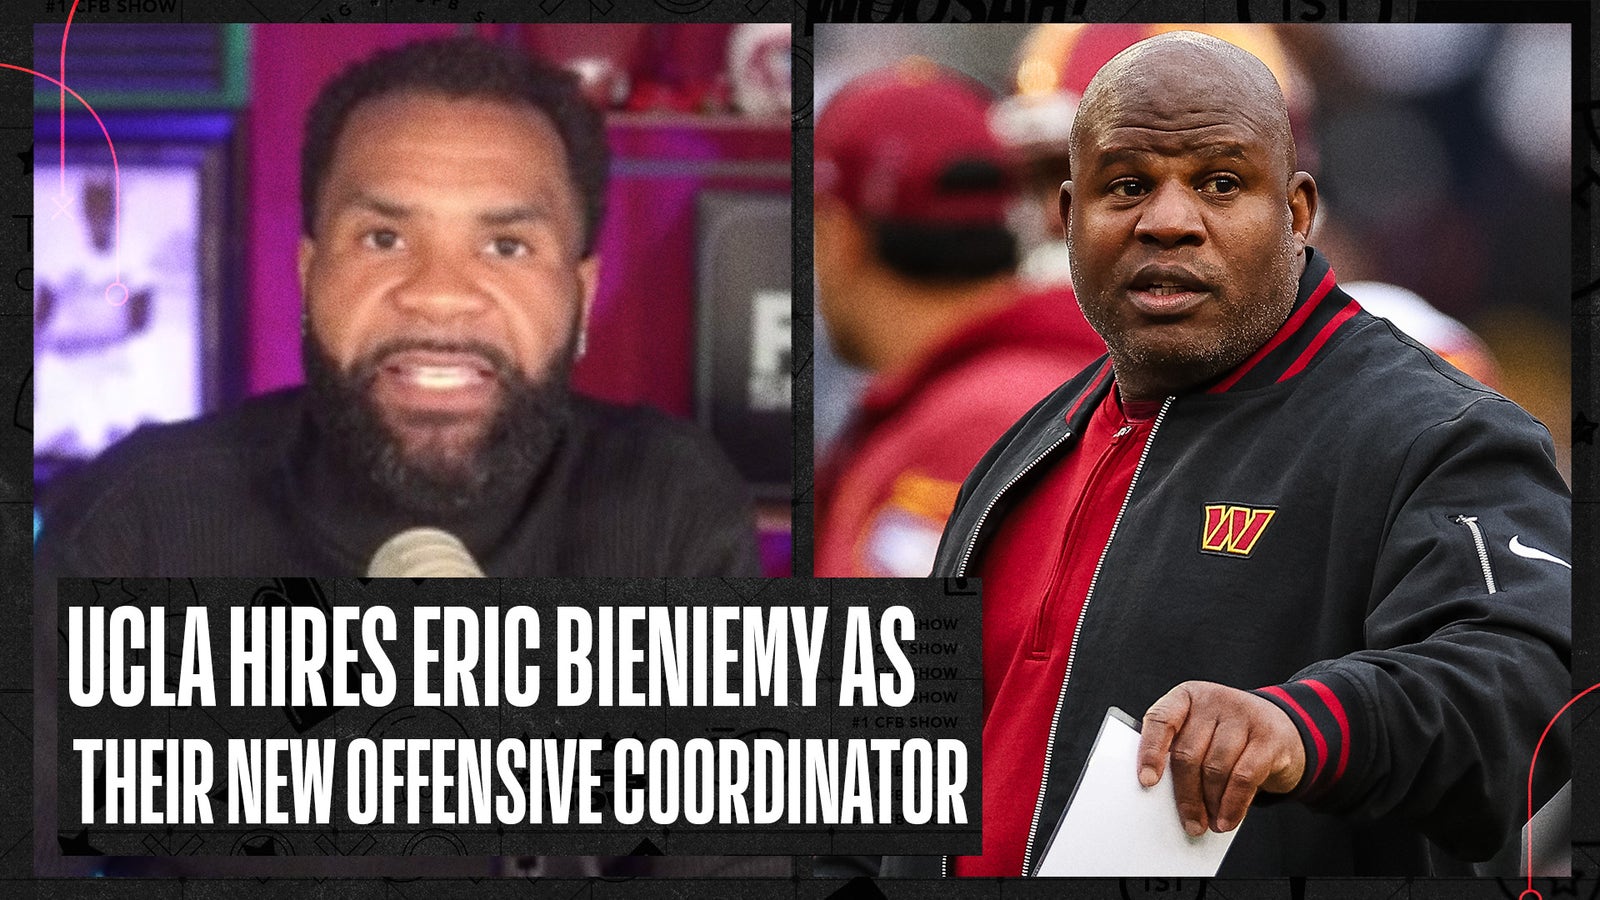 UCLA hires Eric Bieniemy as its new offensive coordinator